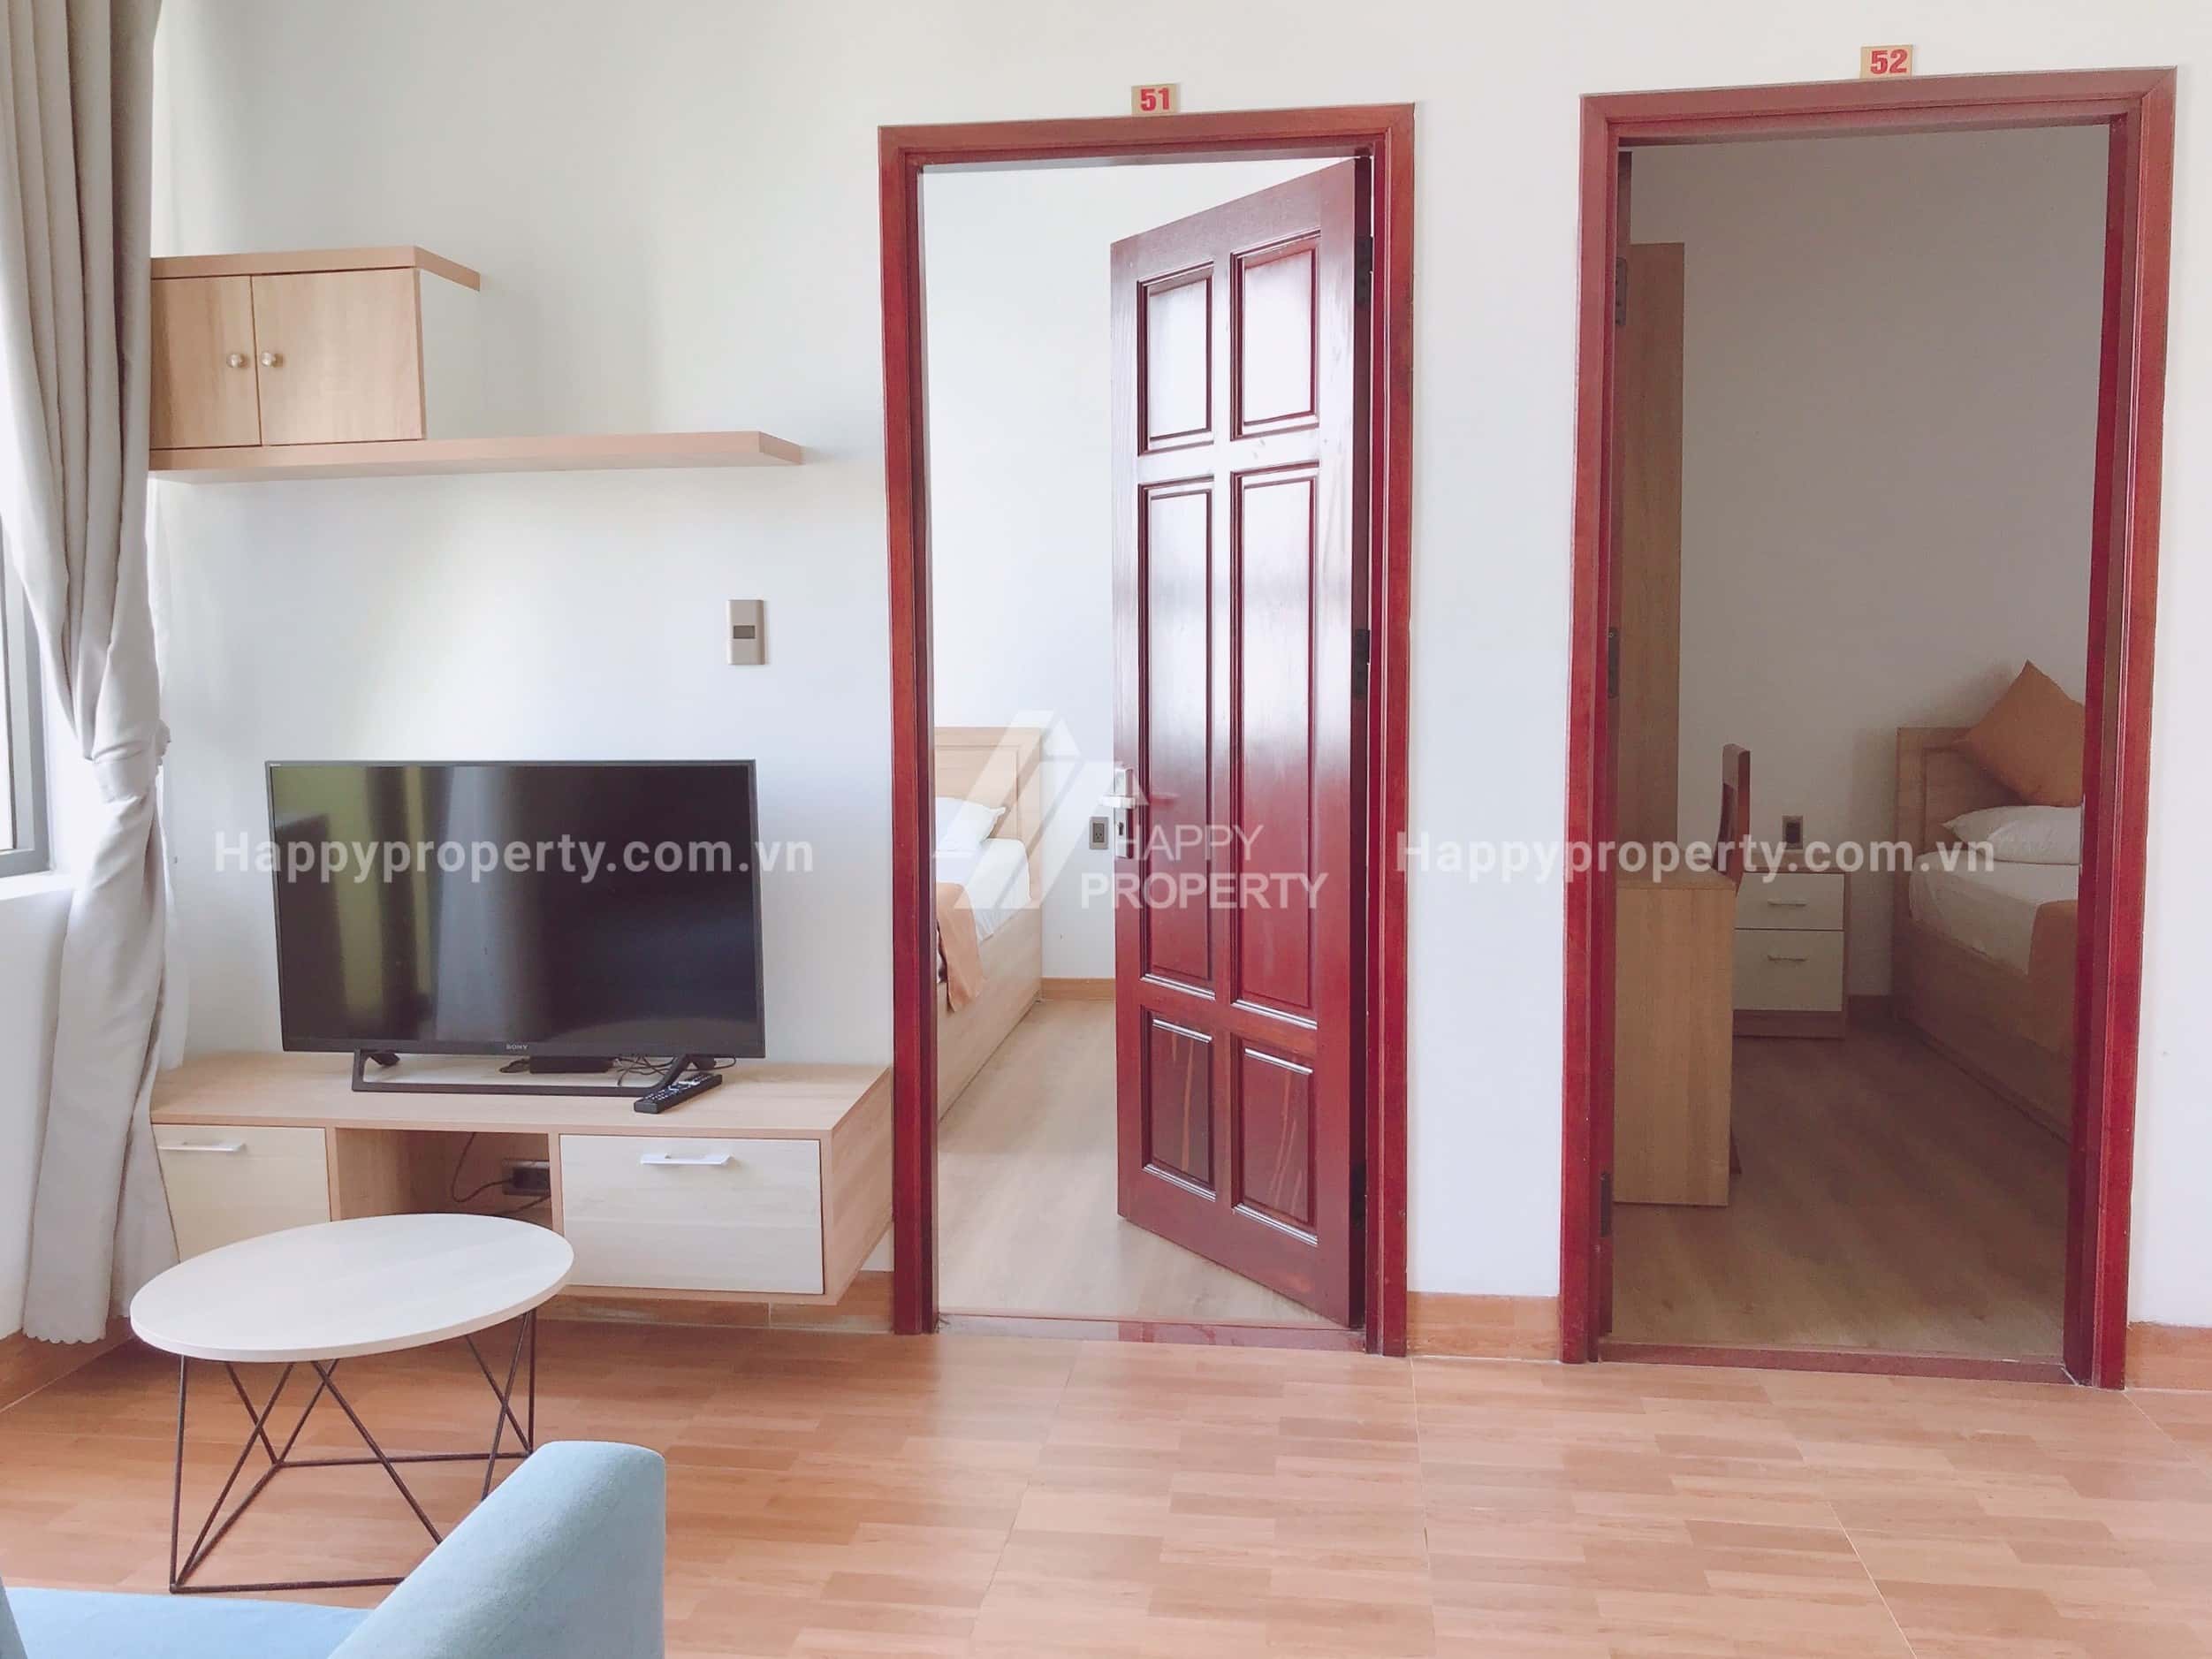 My Khe Beach Area 2 Bedrooms Apartment For Rent – NHS30